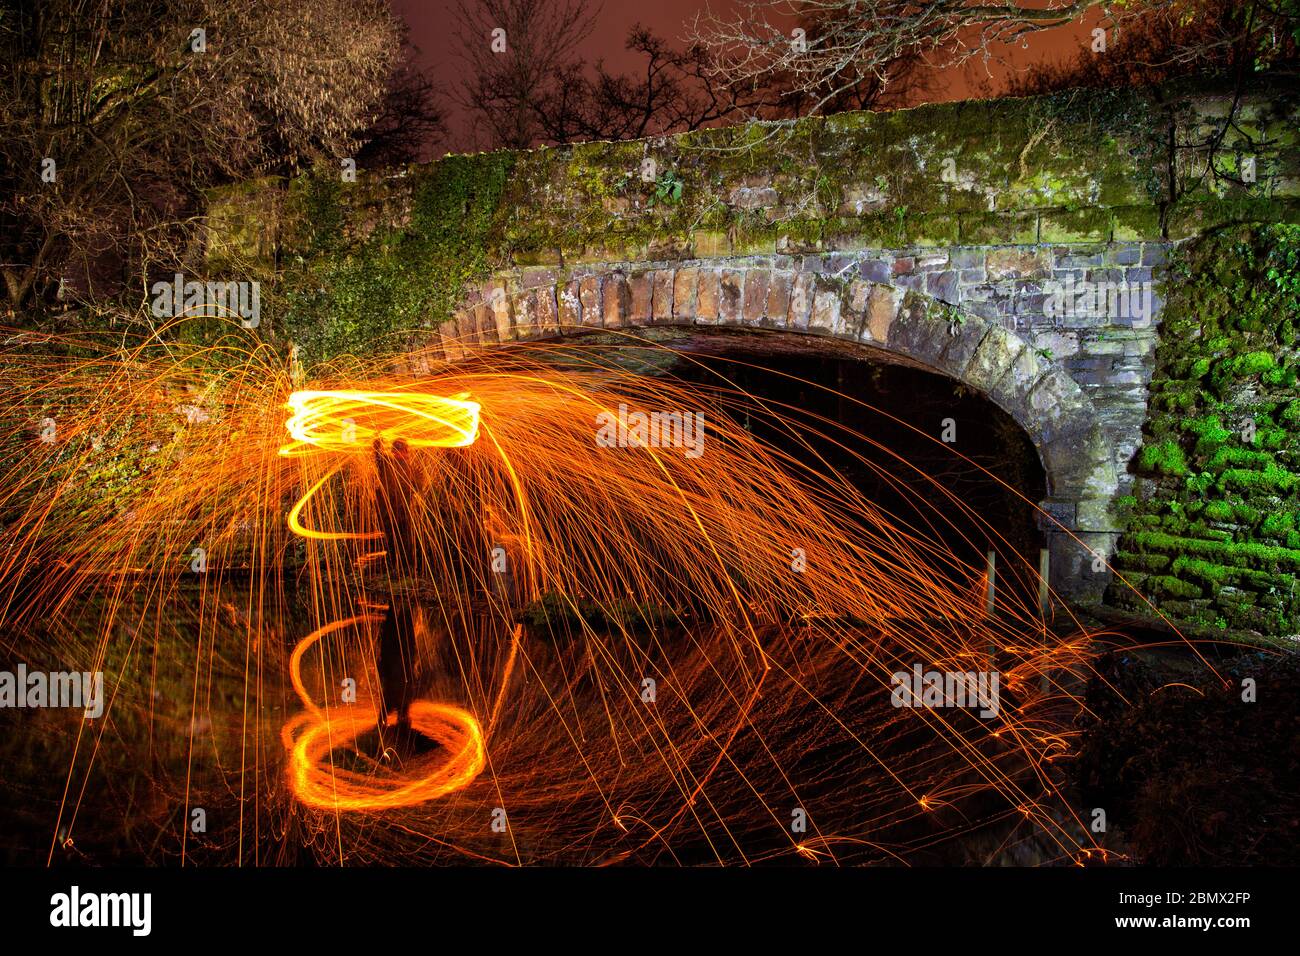 afire spinning with steel wool at an old disused railway bridge Stock Photo